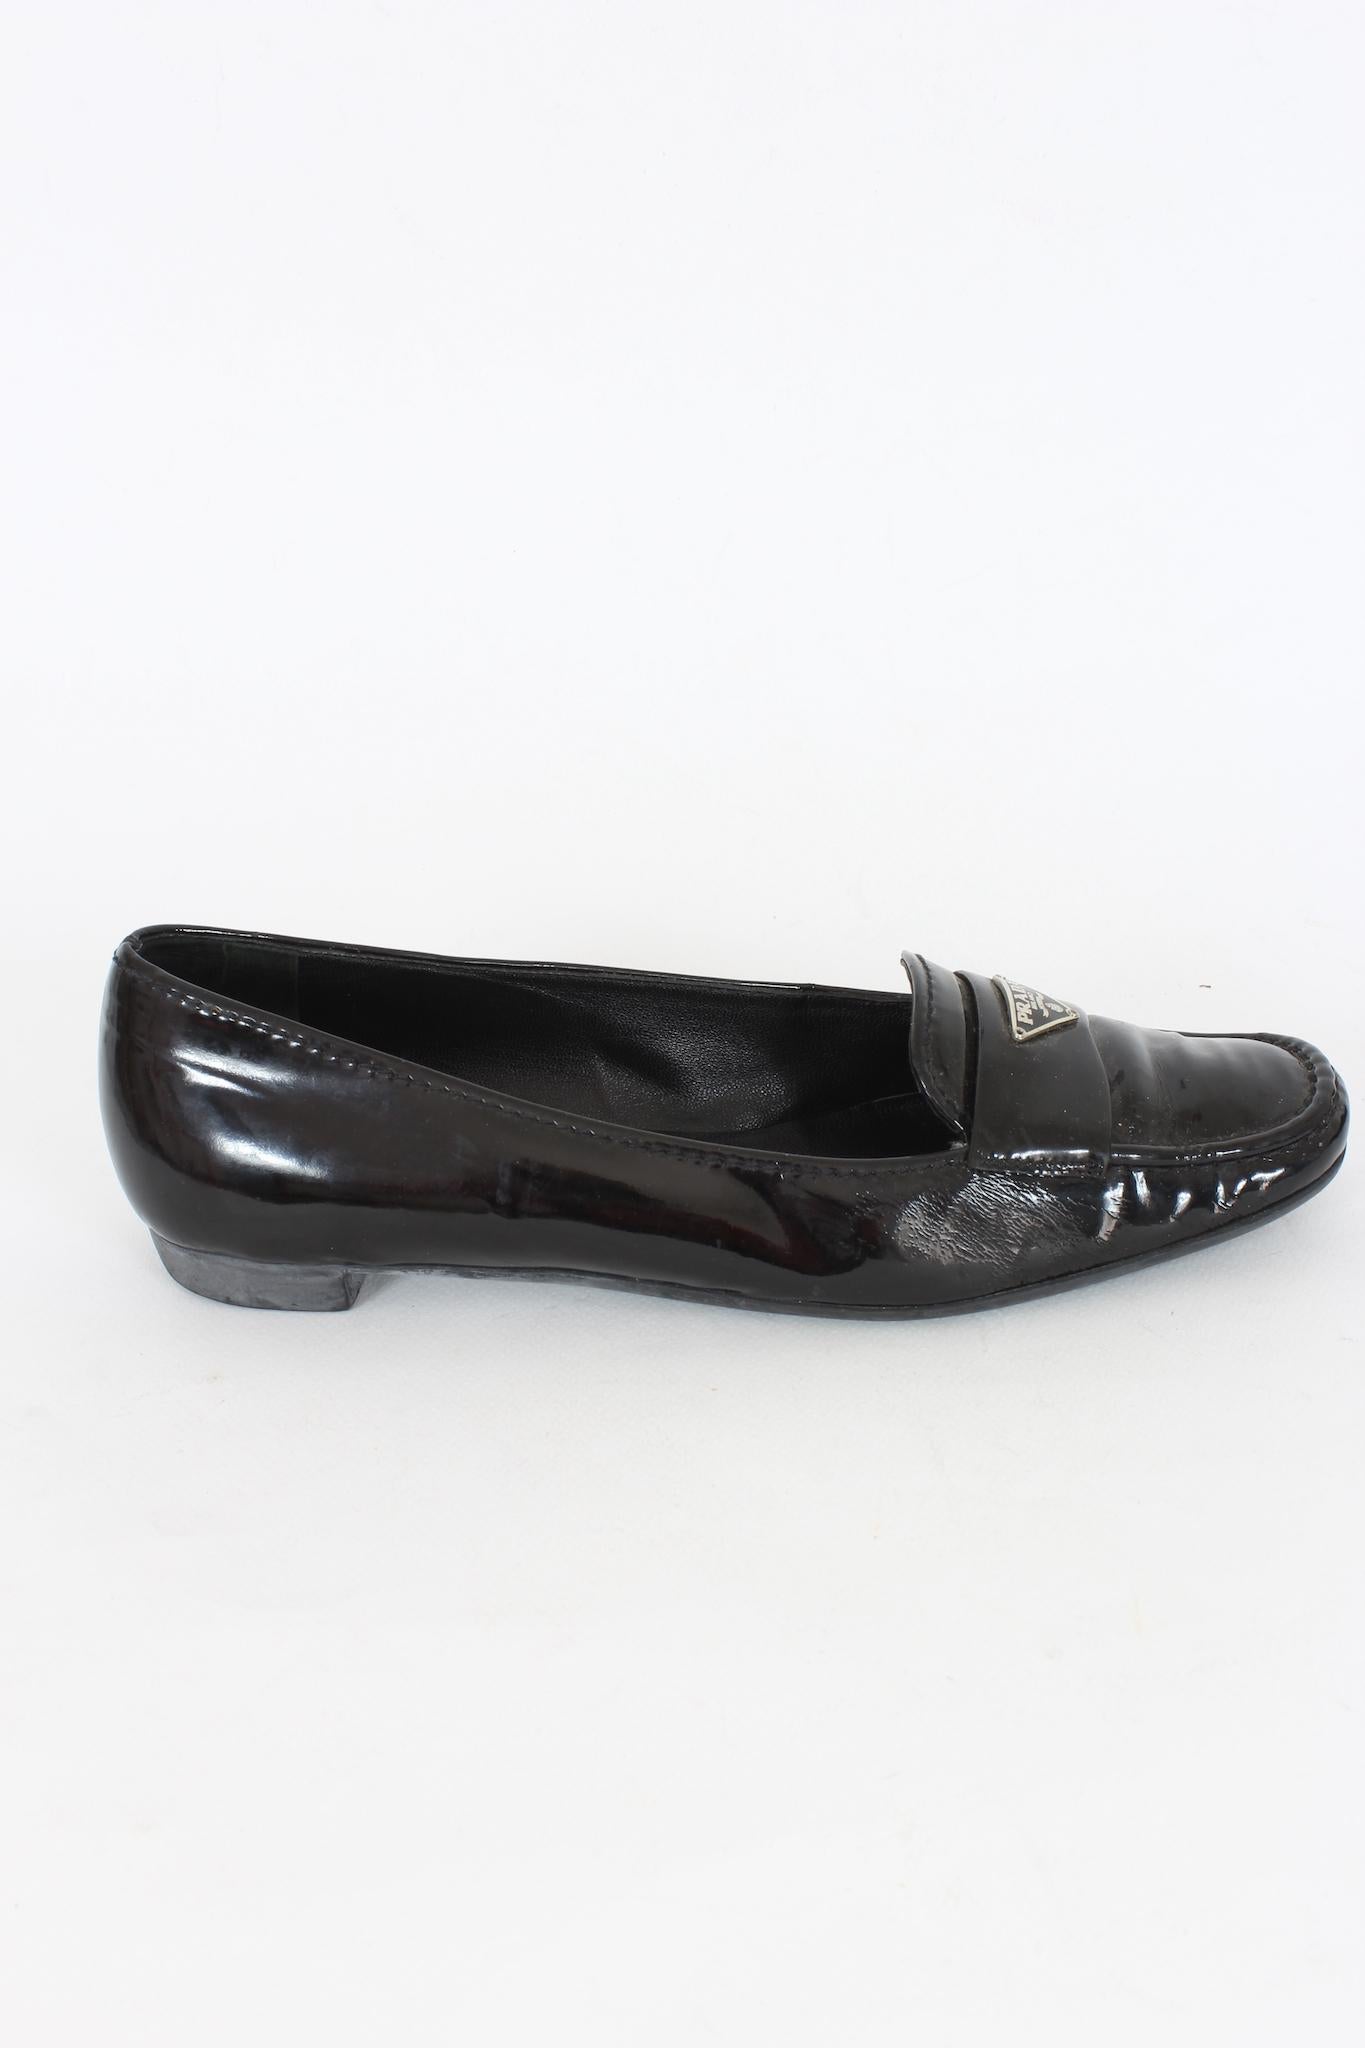 Prada vintage 90s shoes. Moccasins model in black patent leather with raised silver-colored logo. Rubber sole. Made in Italy.

Size: 39 IT 9 US 6 UK

Length: 26 cm

